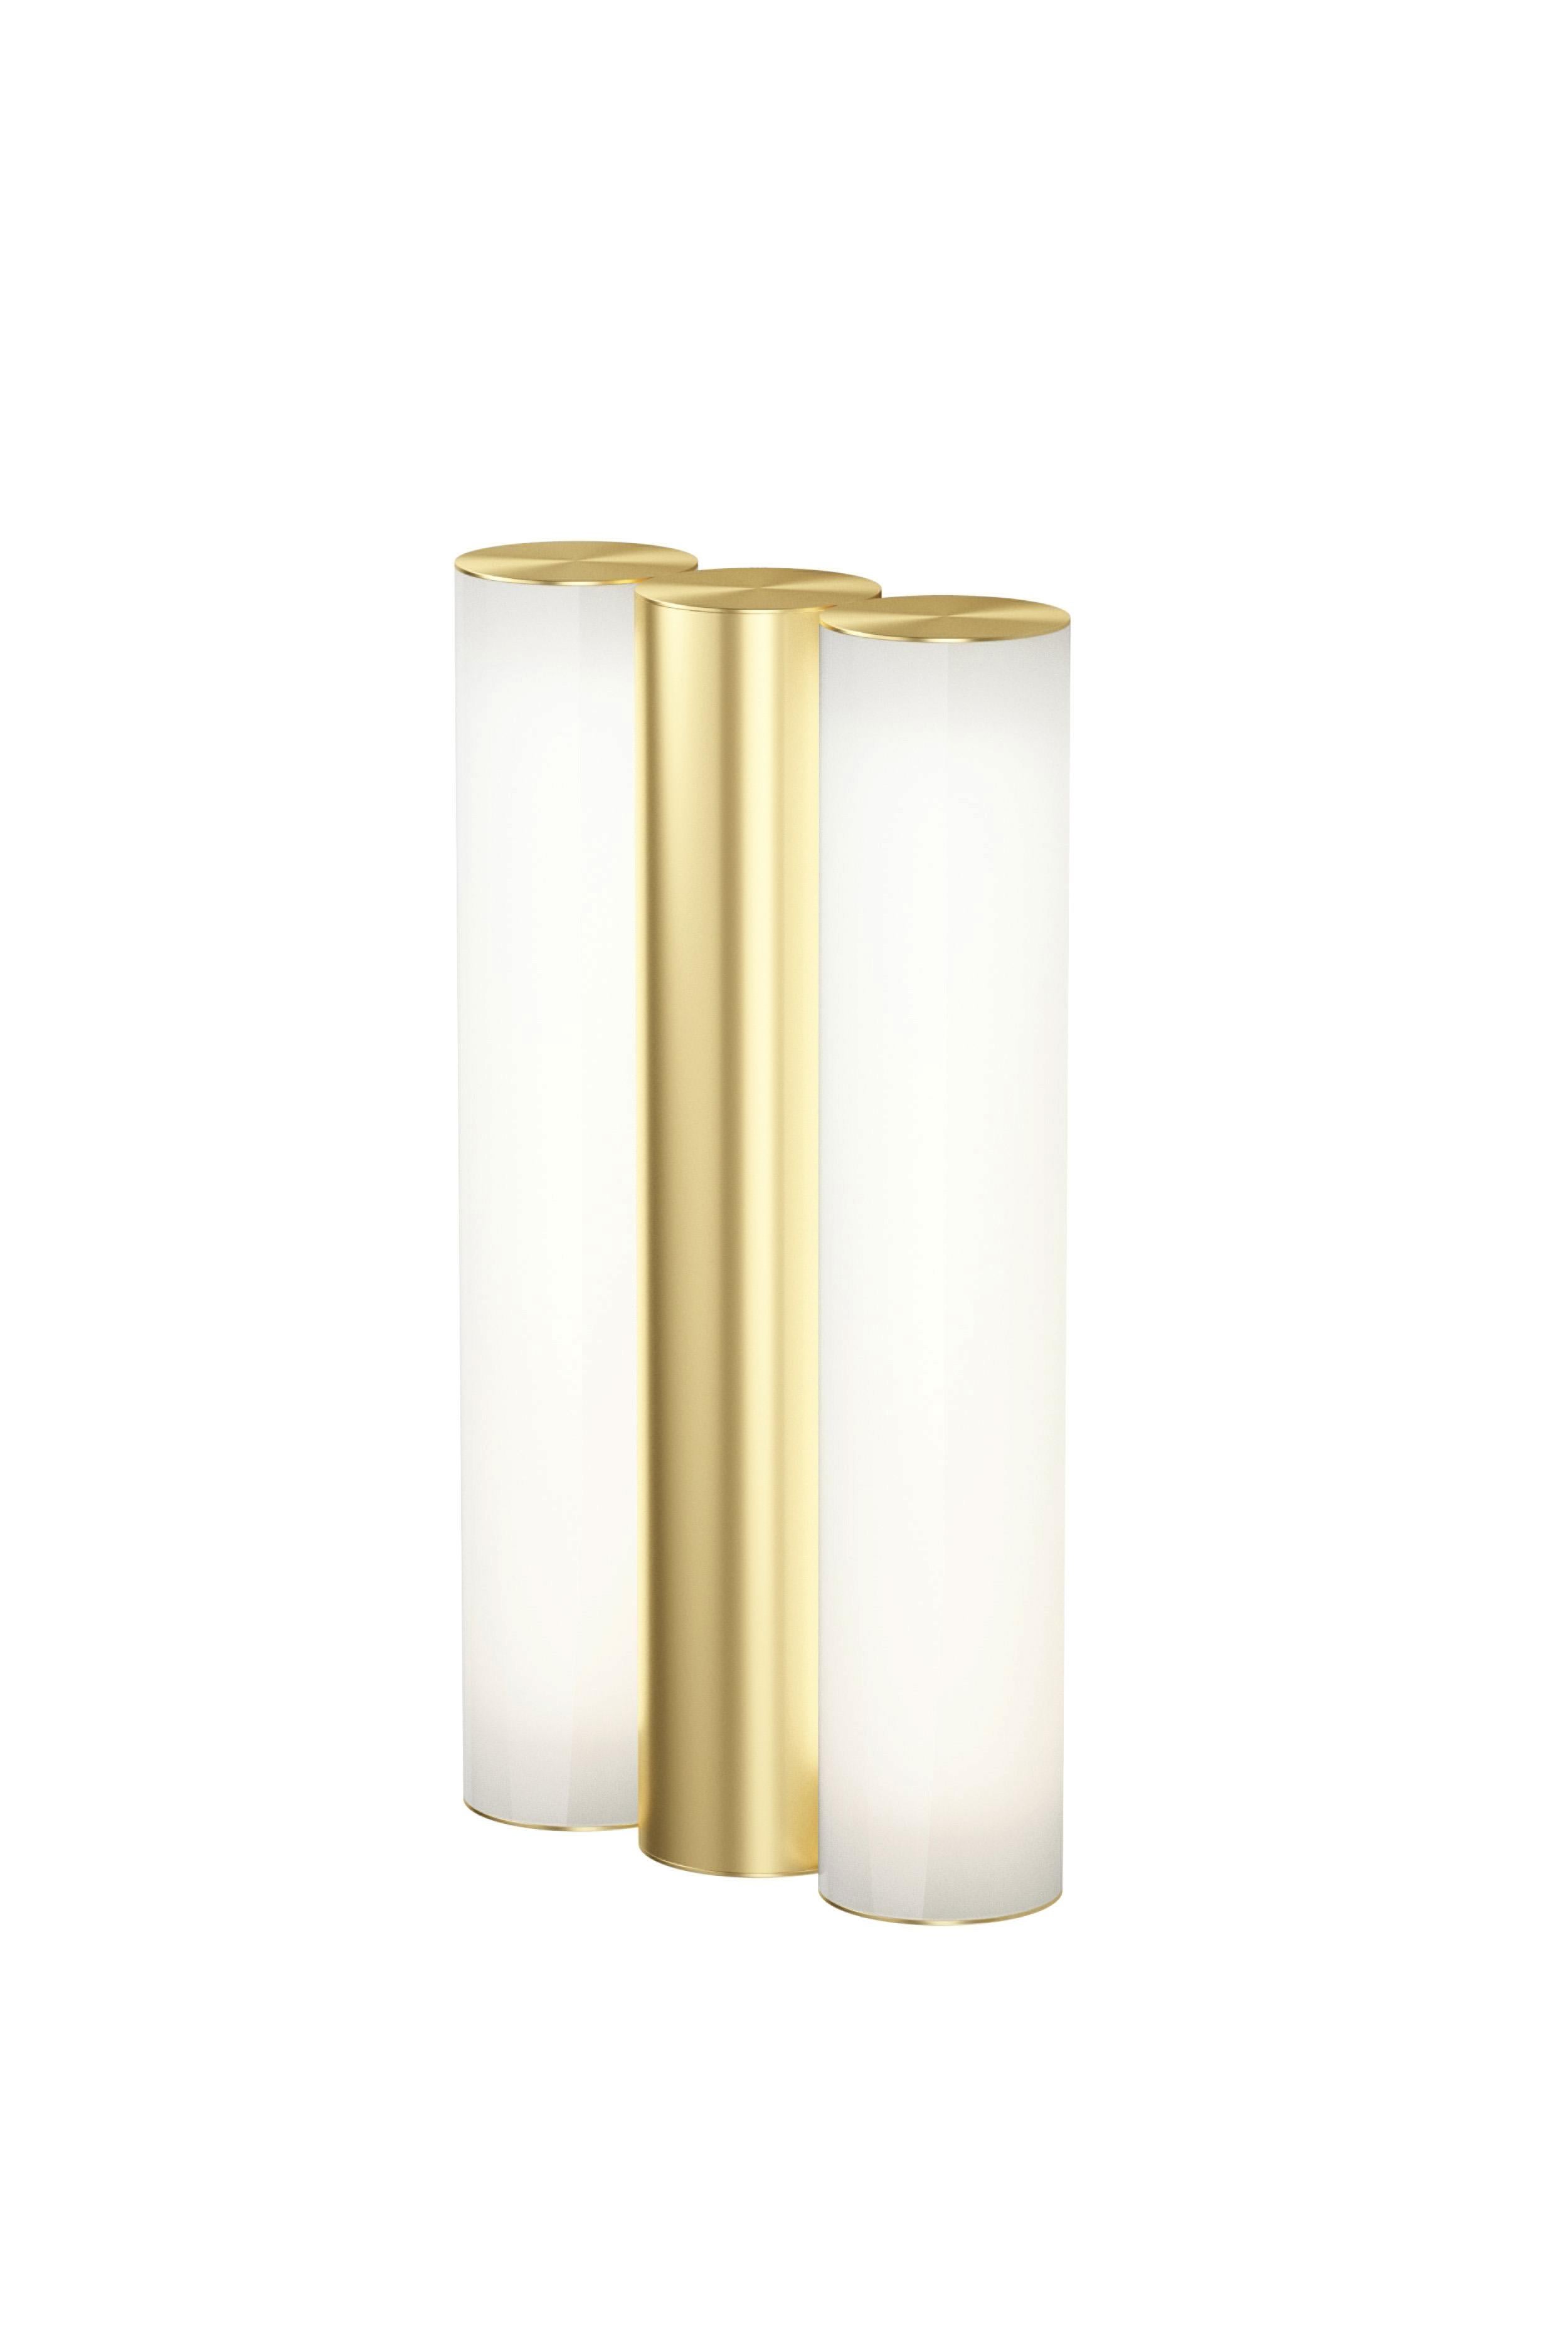 IP Gamma satin brass wall light by Sylvain Willenz
Dimensions: D15.2 x W5 X H28.4 cm
Materials: Solid brass, Satin Brass
Others finishes are available.

All our lamps can be wired according to each country. If sold to the USA it will be wired